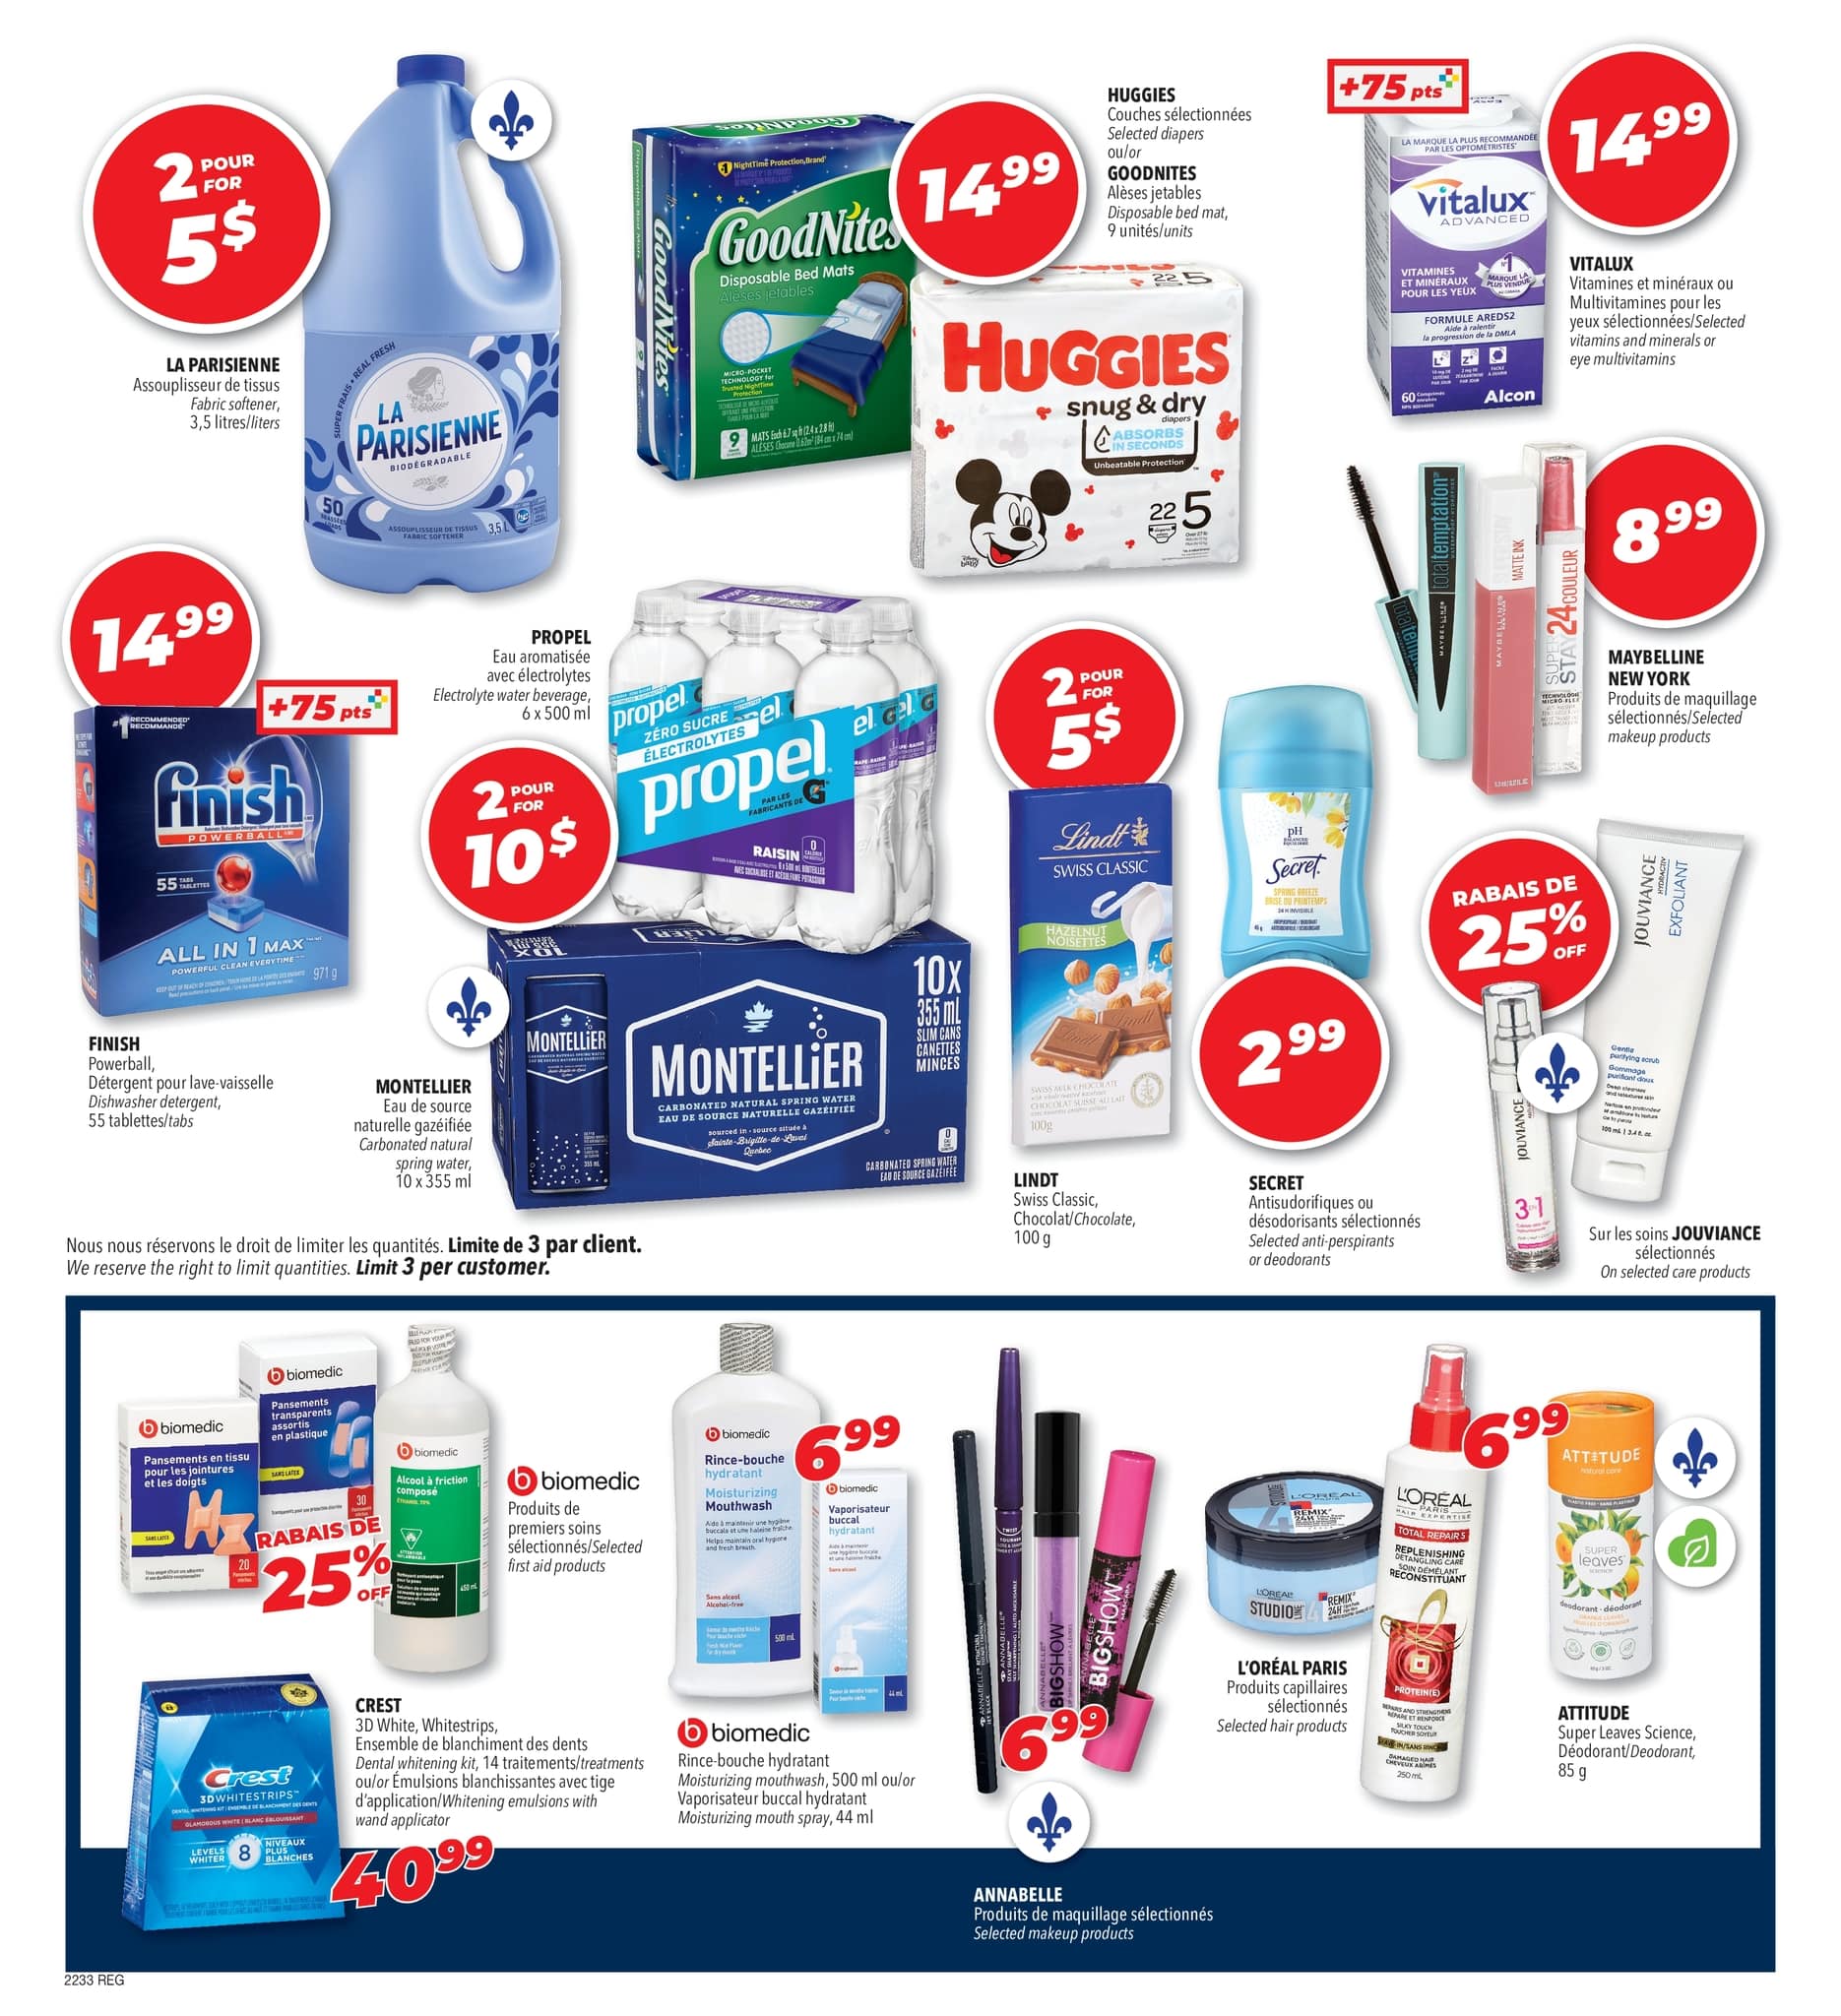 Familiprix - Weekly Flyer Specials - Page 9